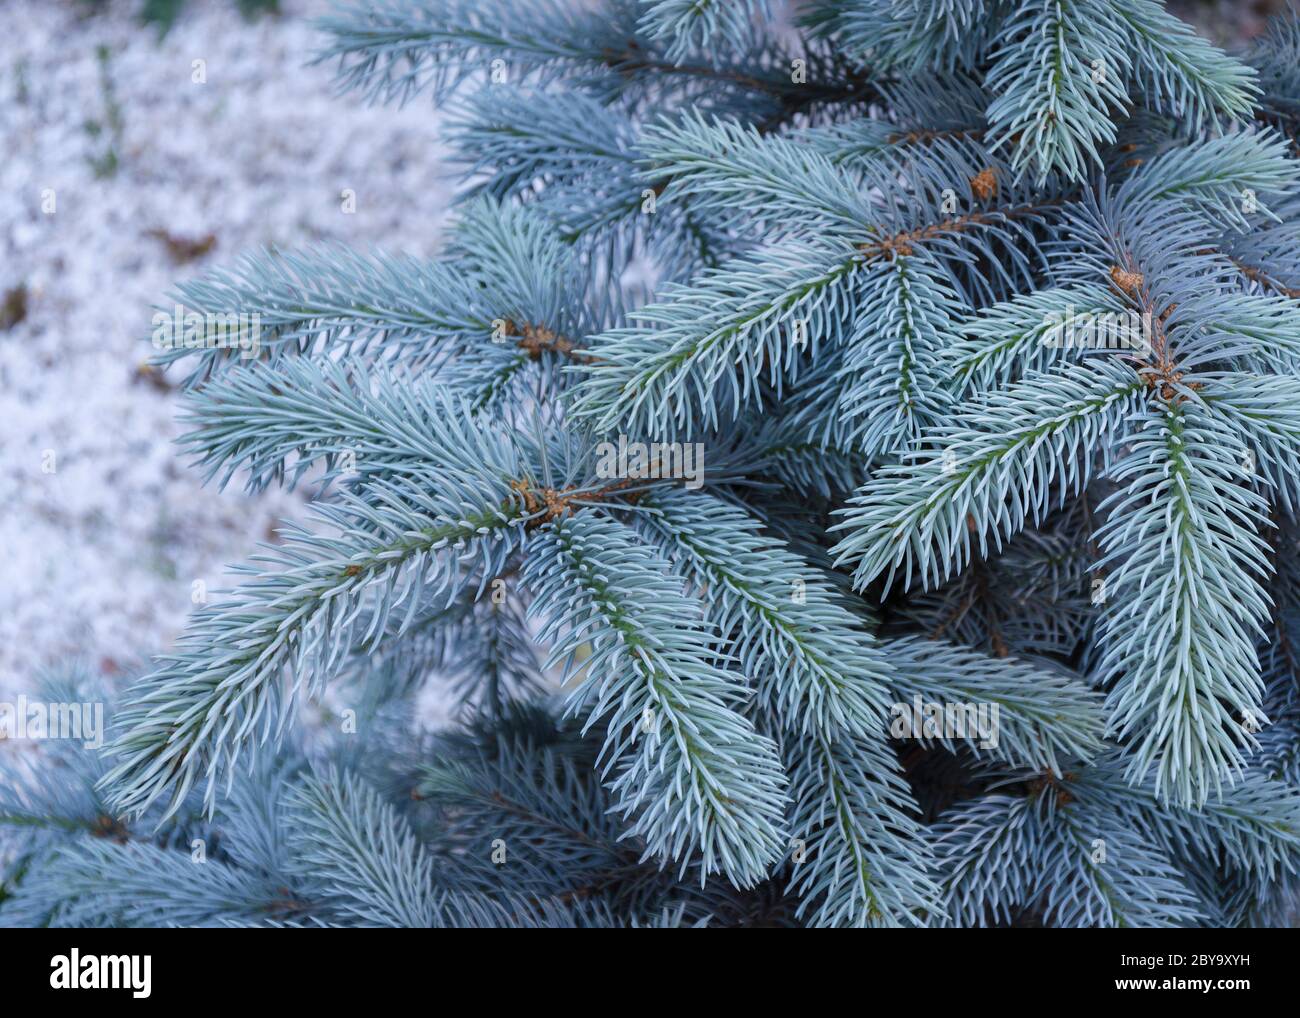 blue spruce tree with blue needles 3 Stock Photo